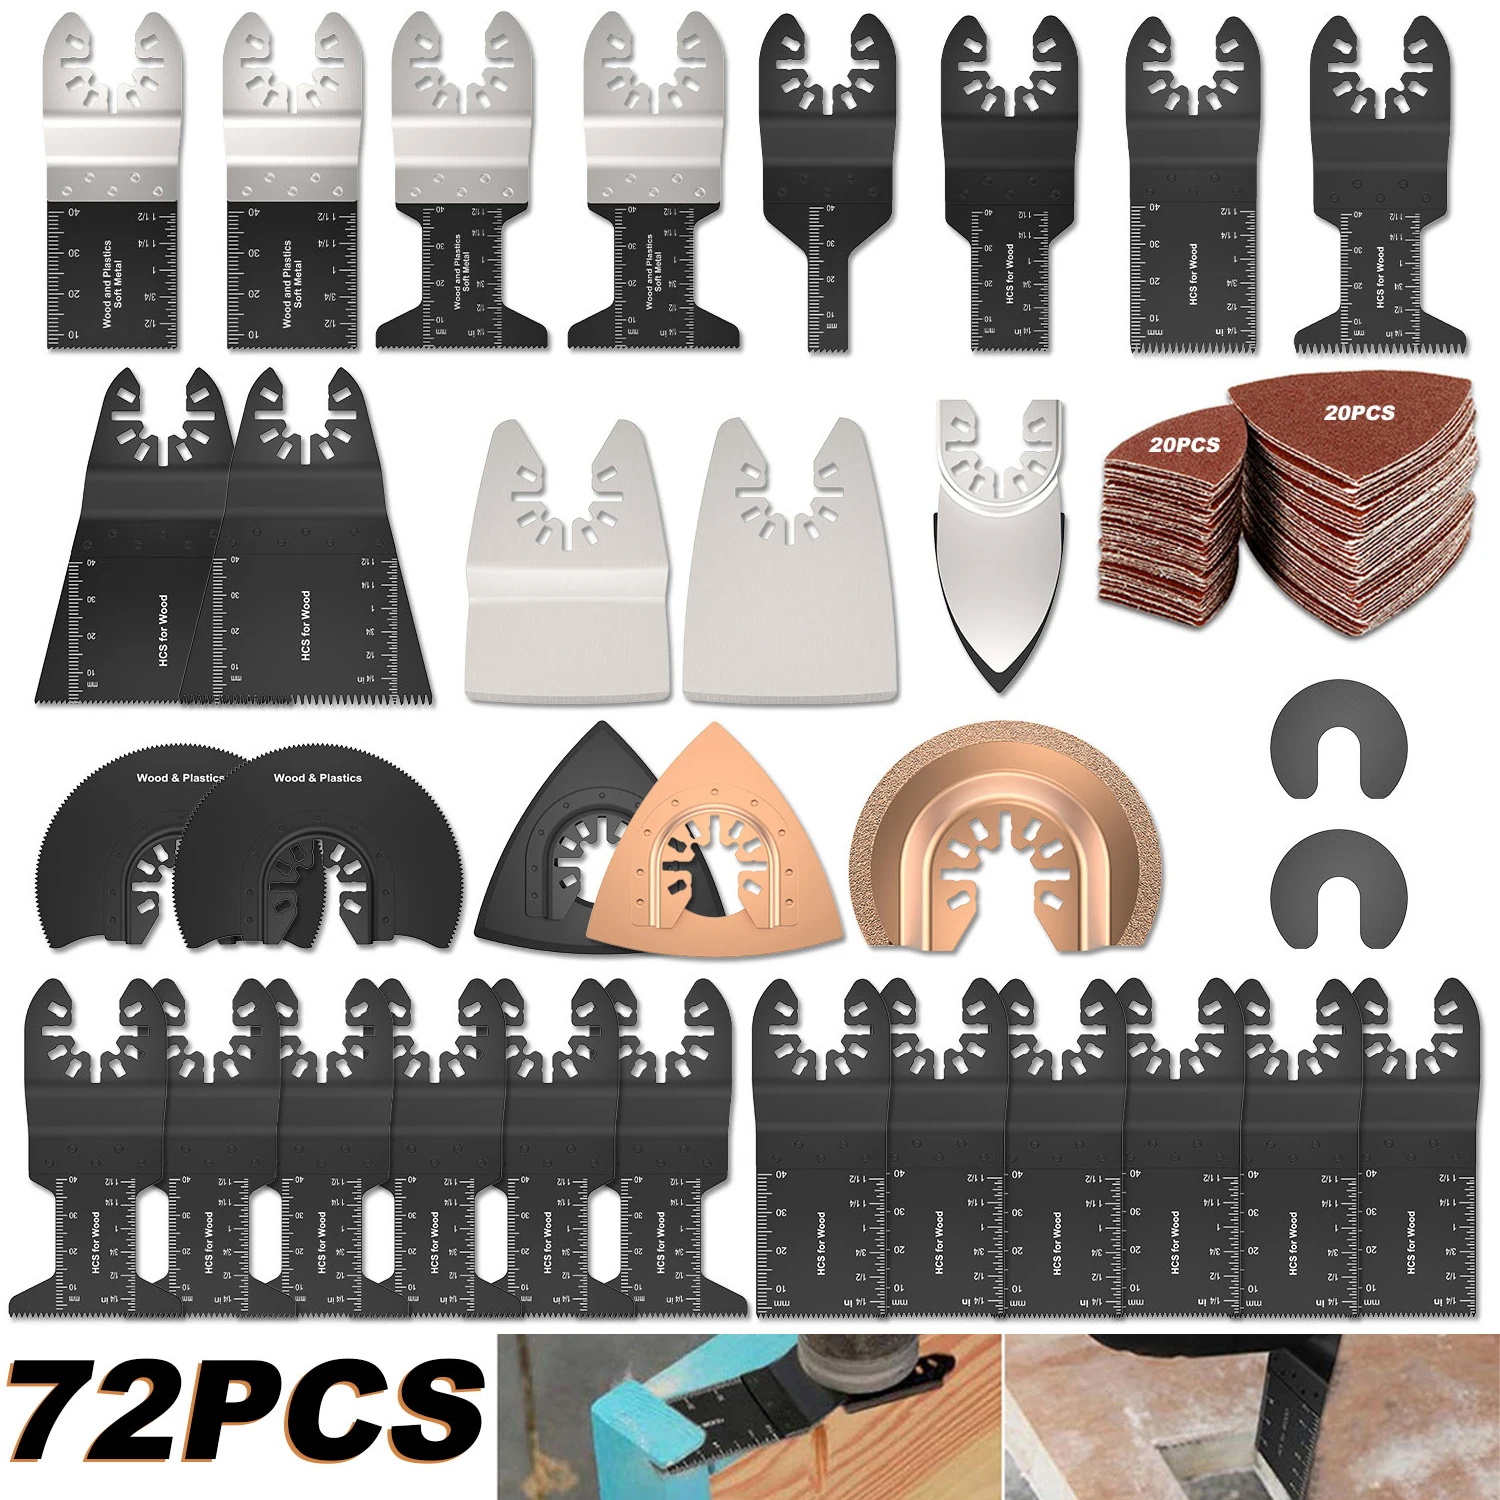 

72Pcs Oscillating Saw Blades Quick Release Multitool Wood Metal Cutter Power Accessories for Fein Multimaster, Dremel, Bosch